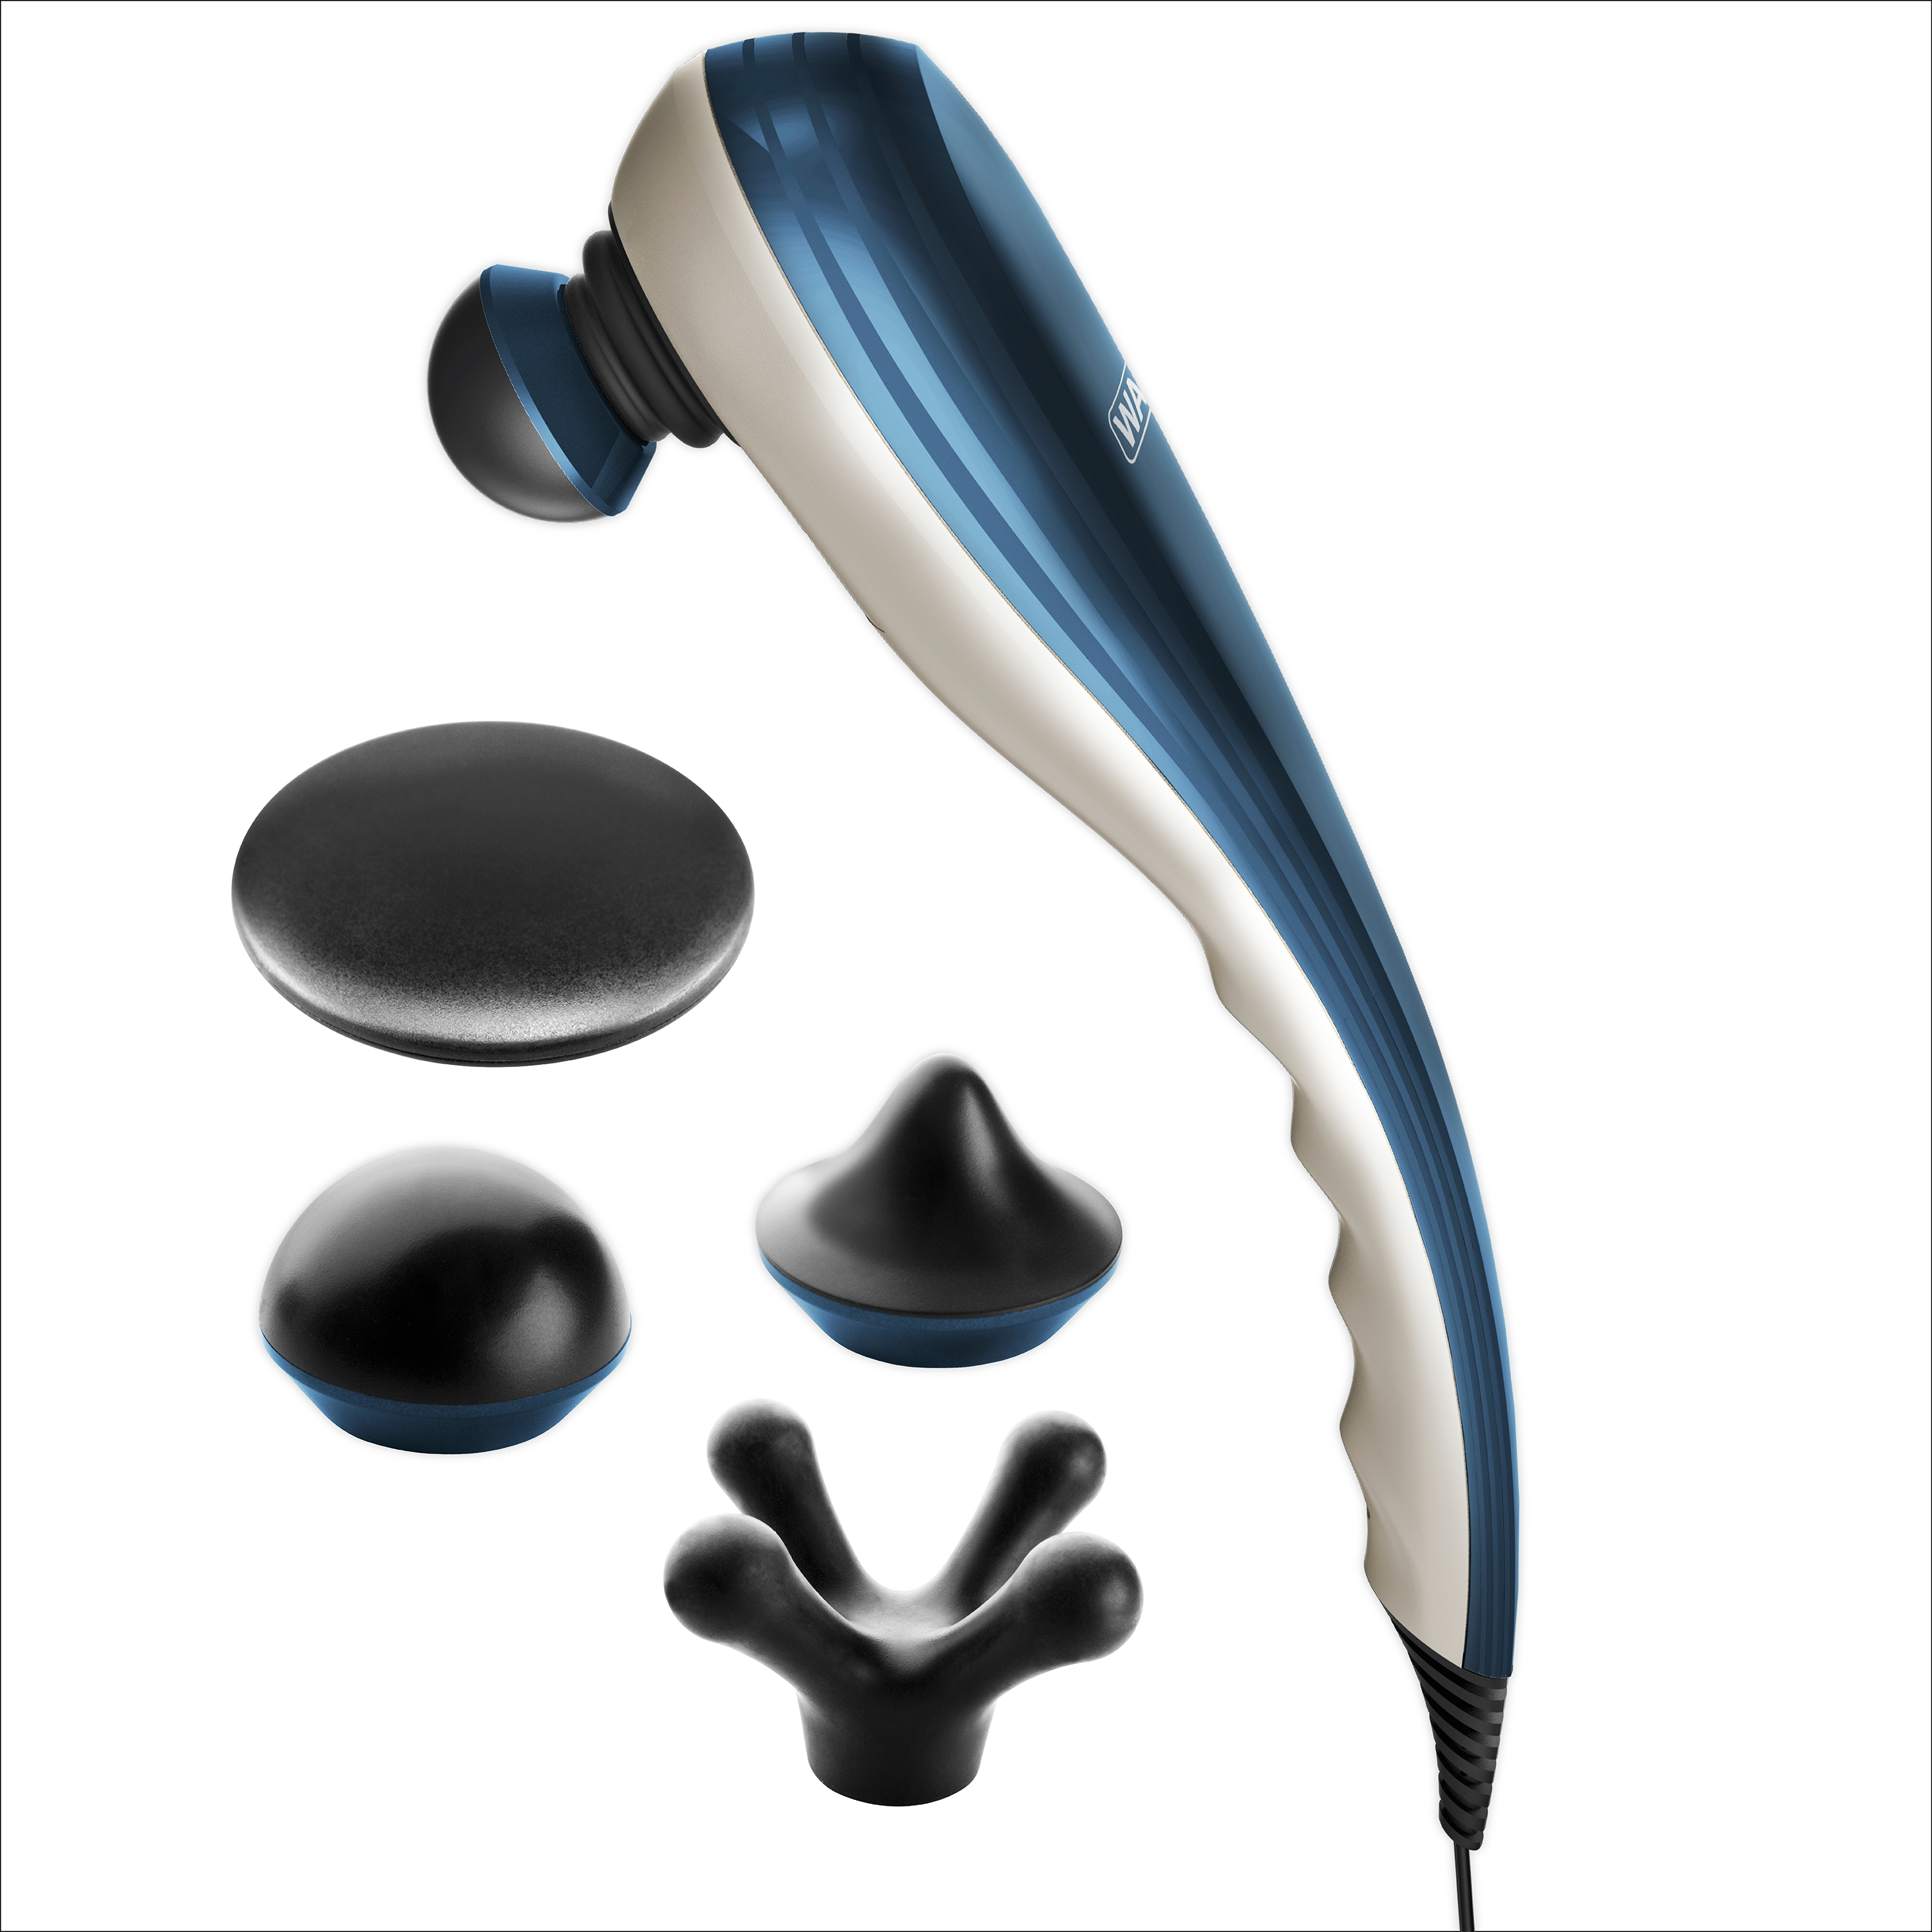 Wahl Handheld Deep Tissue Percussion Therapeutic Massager for Full Body Massage, Model 4290-300 - image 2 of 10